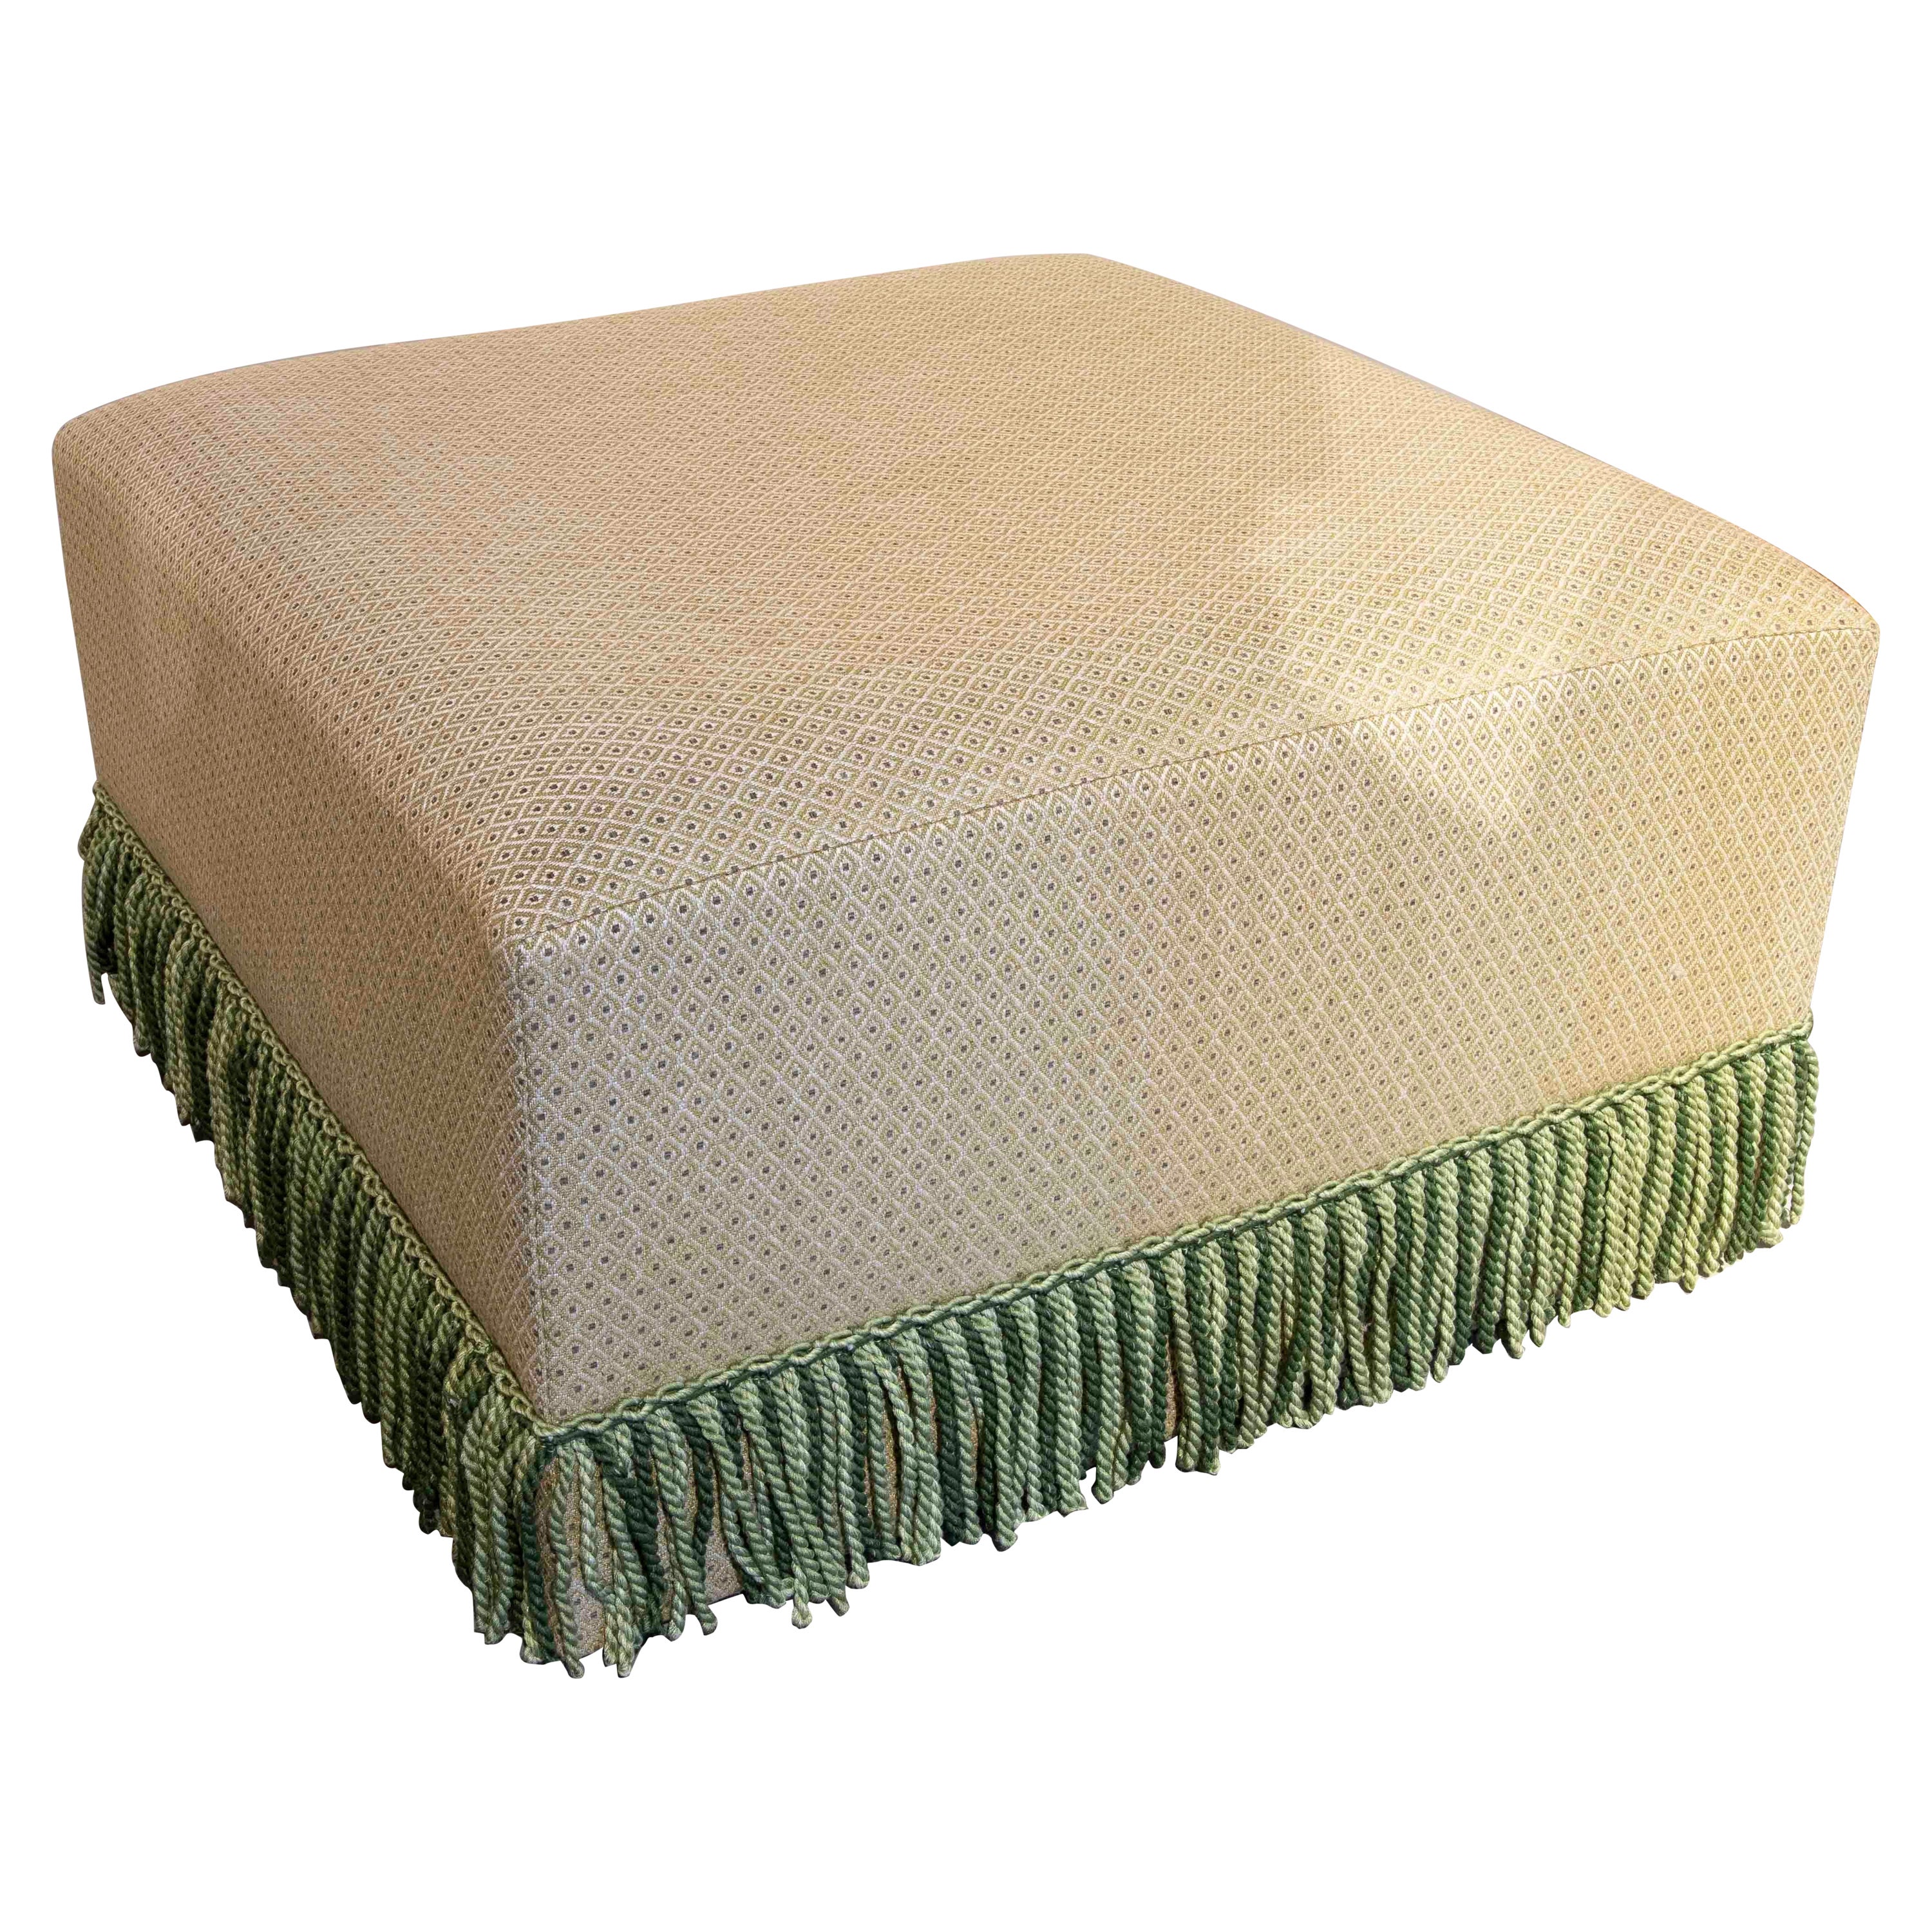 Square Pouf Upholstered with a New Fabric with Flower Decoration in Green Tones For Sale